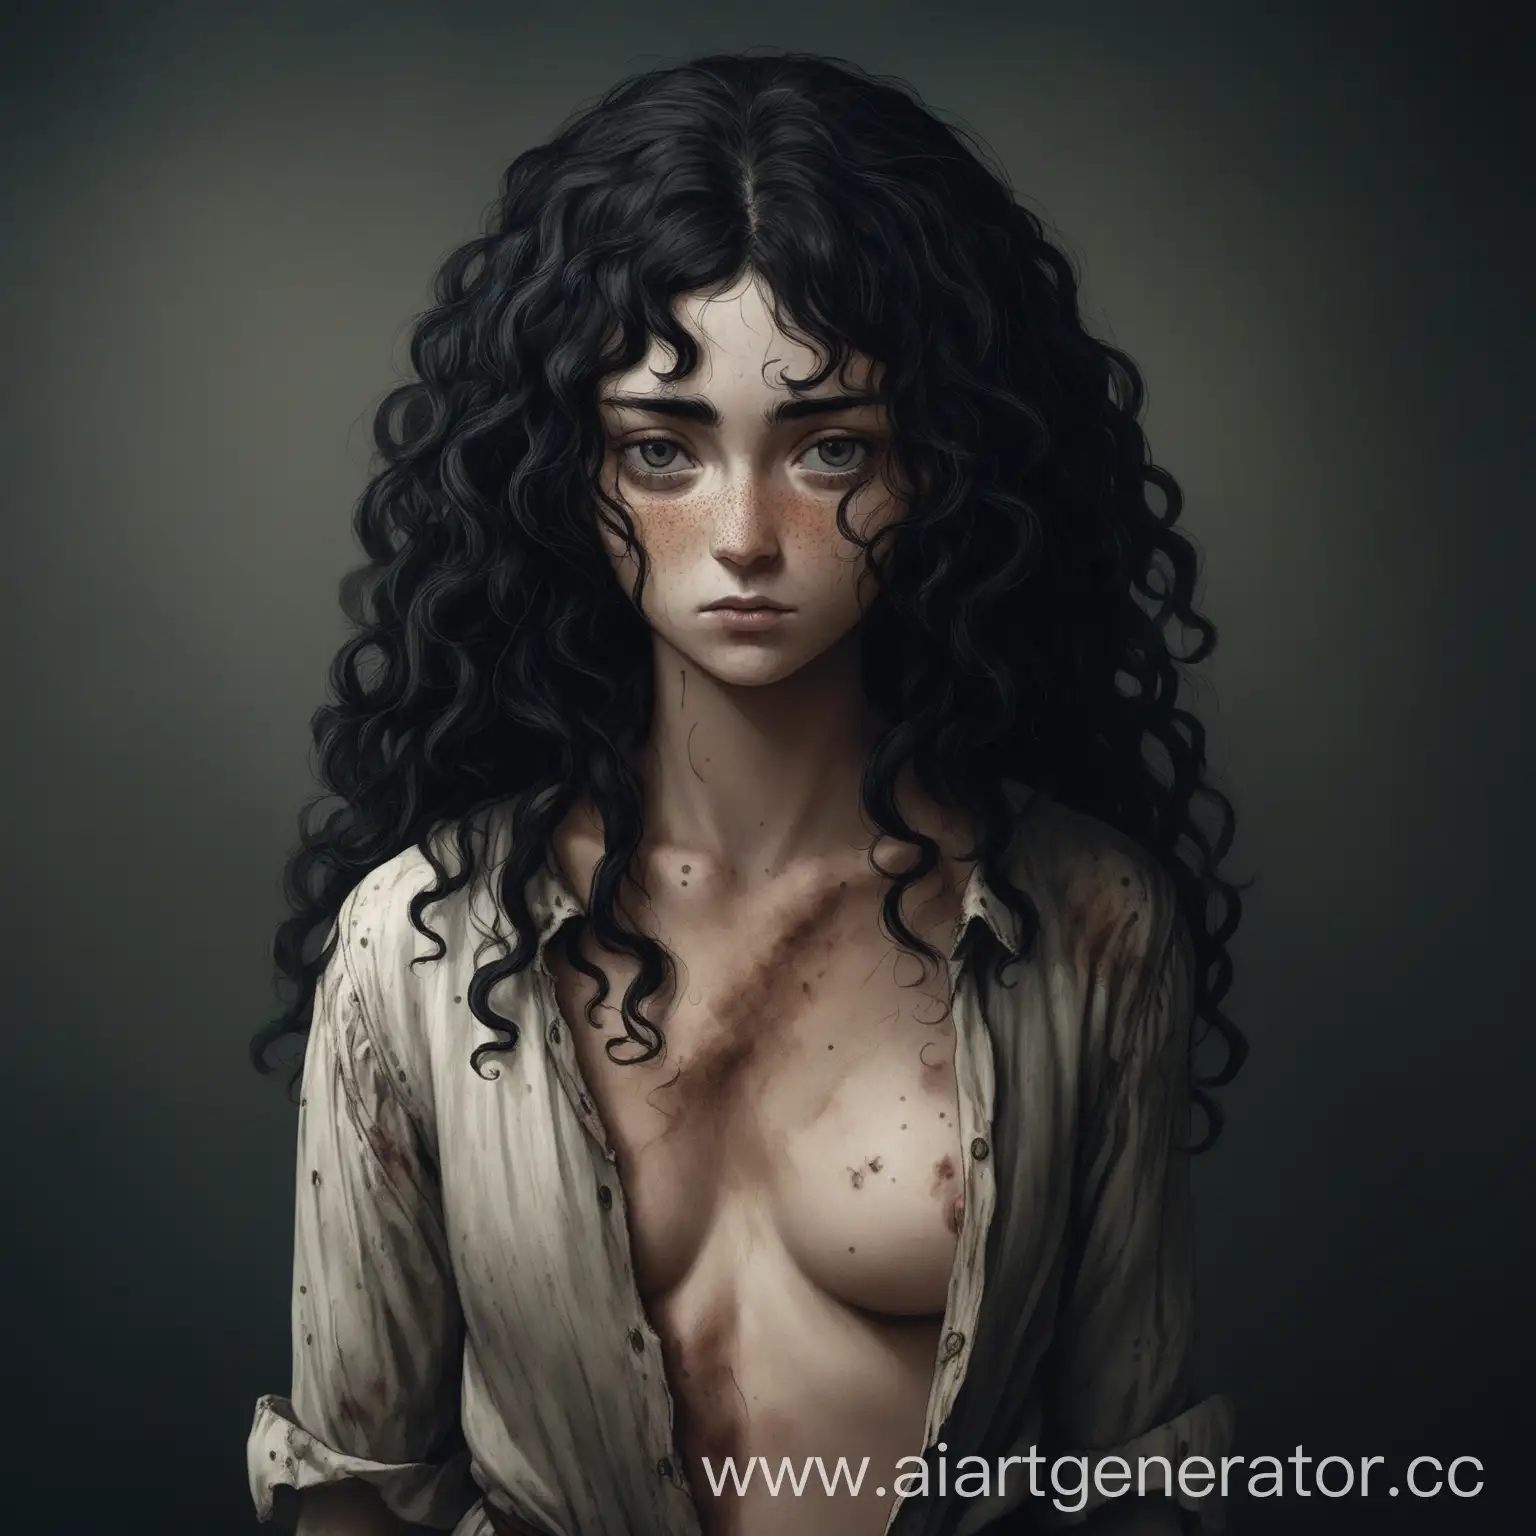 Medieval-Girl-with-Curly-Black-Hair-and-Freckles-in-Tattered-Shirt